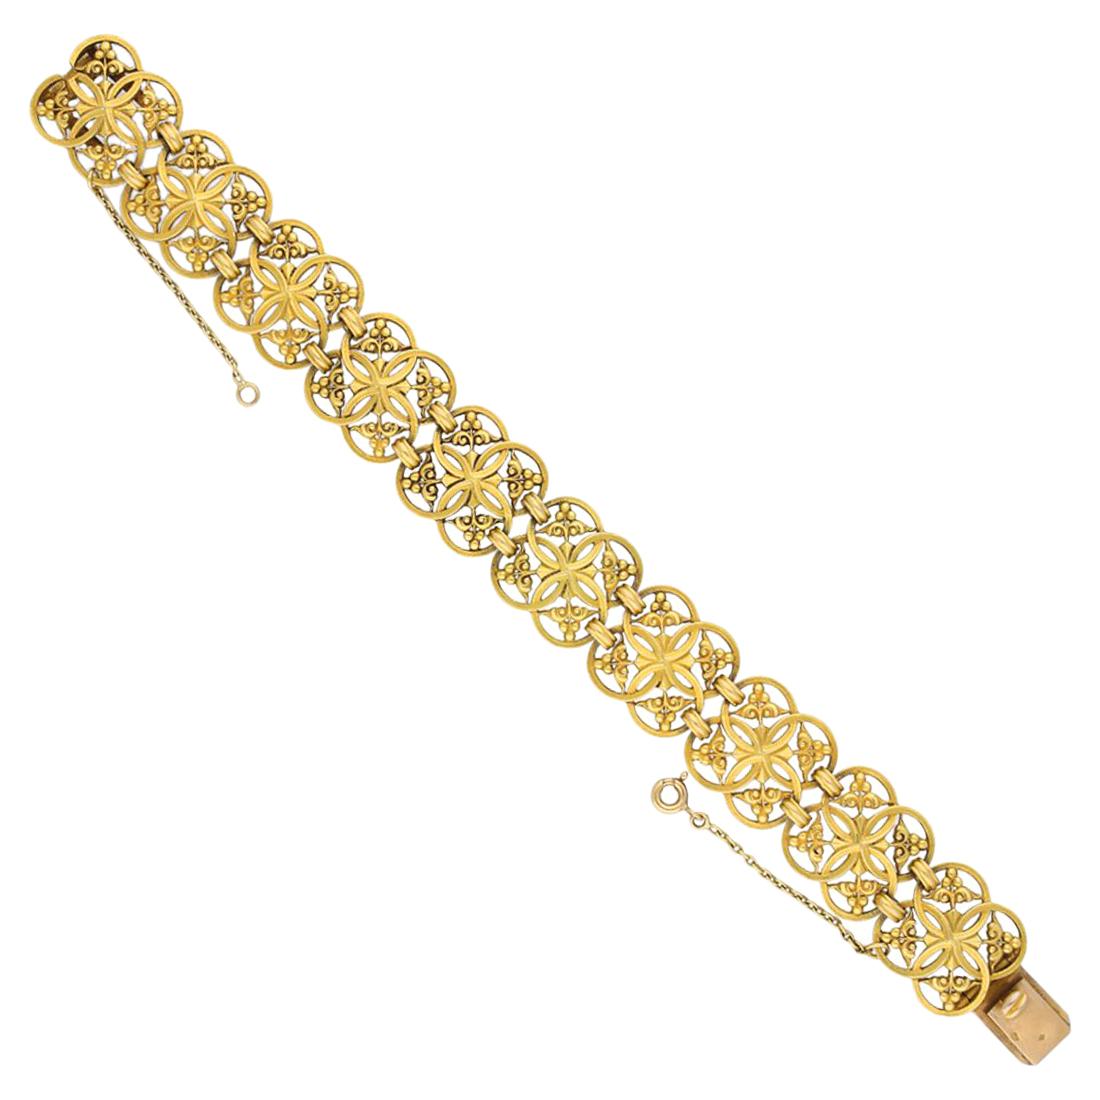 Gothic Revival Gold Bracelet by Wiese, circa 1885 For Sale